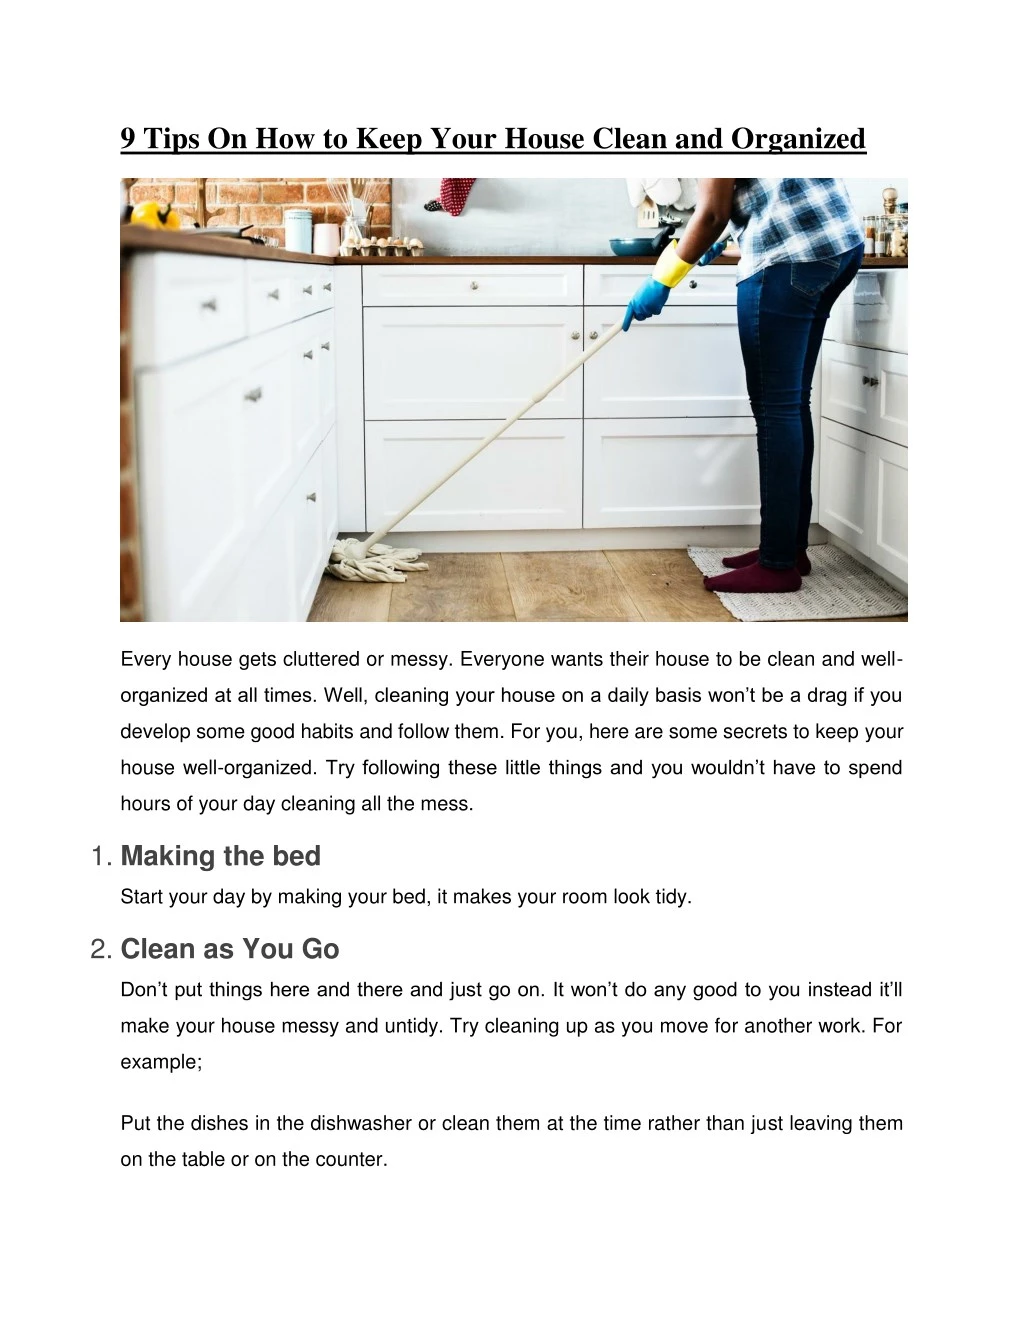 9 tips on how to keep your house clean